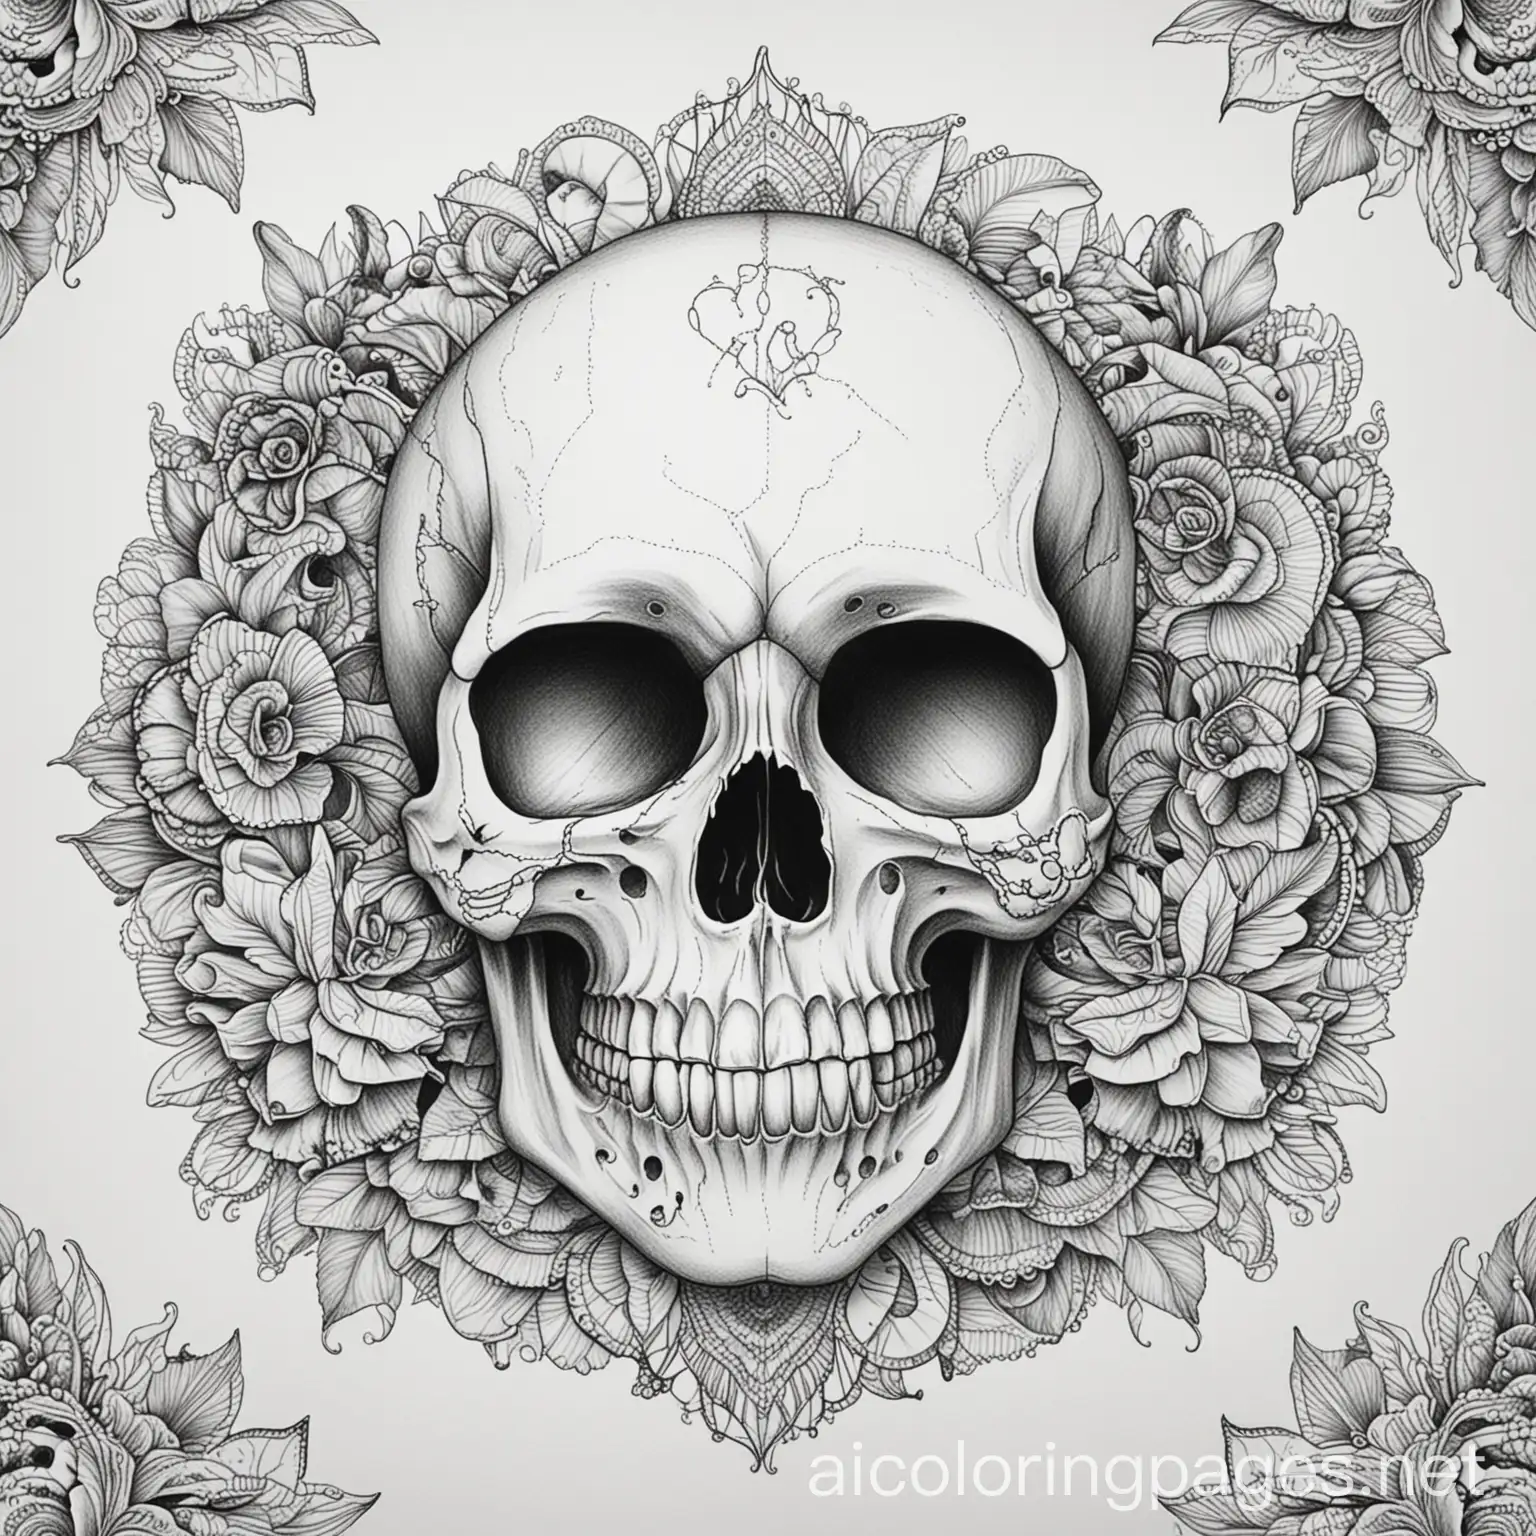 Coloring-Book-Skulls-25-Page-Black-and-White-Line-Art